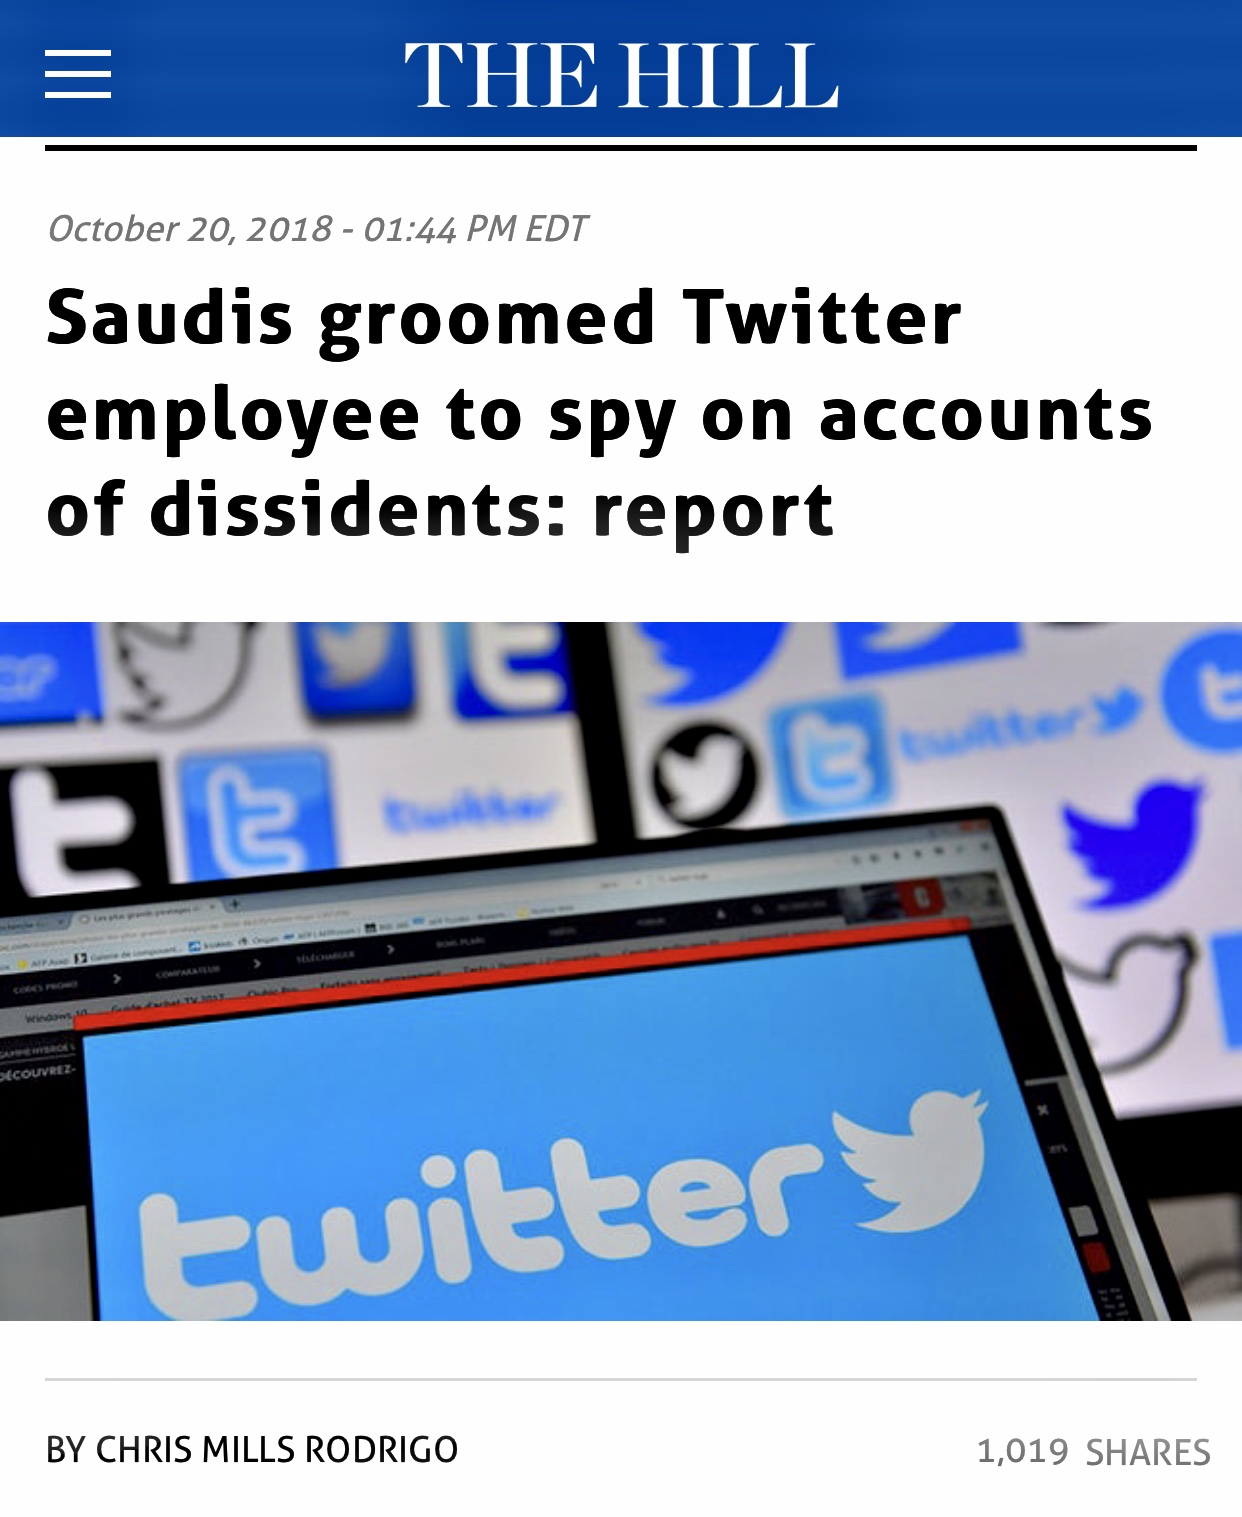 Saudis Groomed Twitter Employee to Spy on Accounts of Dissidents